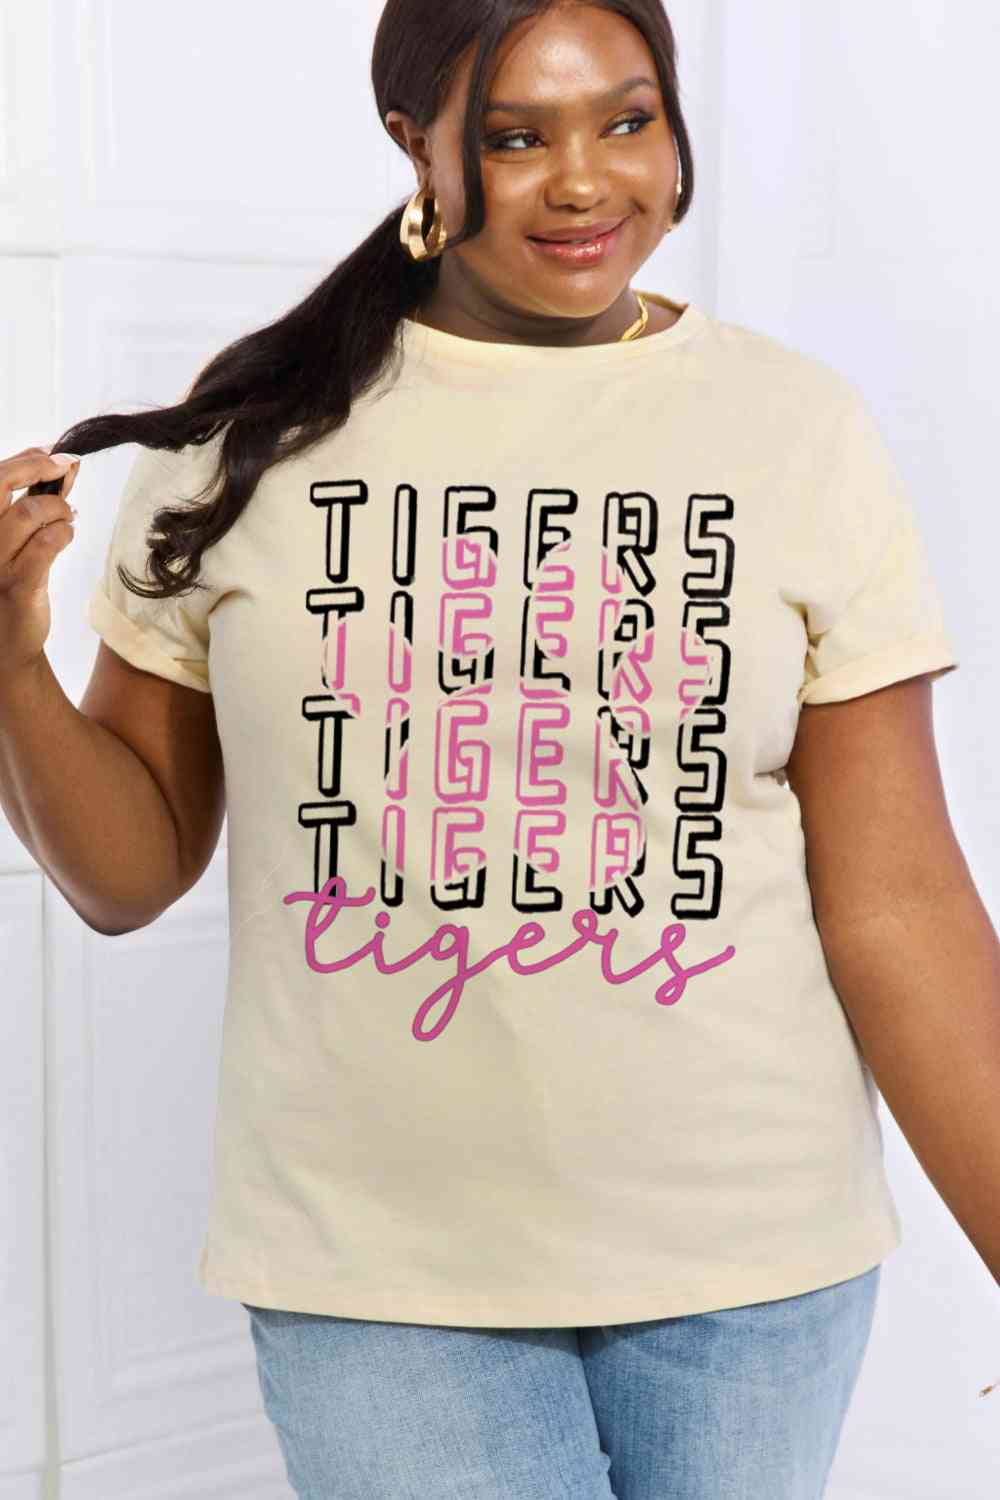 Simply Love Full Size TIGERS Graphic Cotton Tee